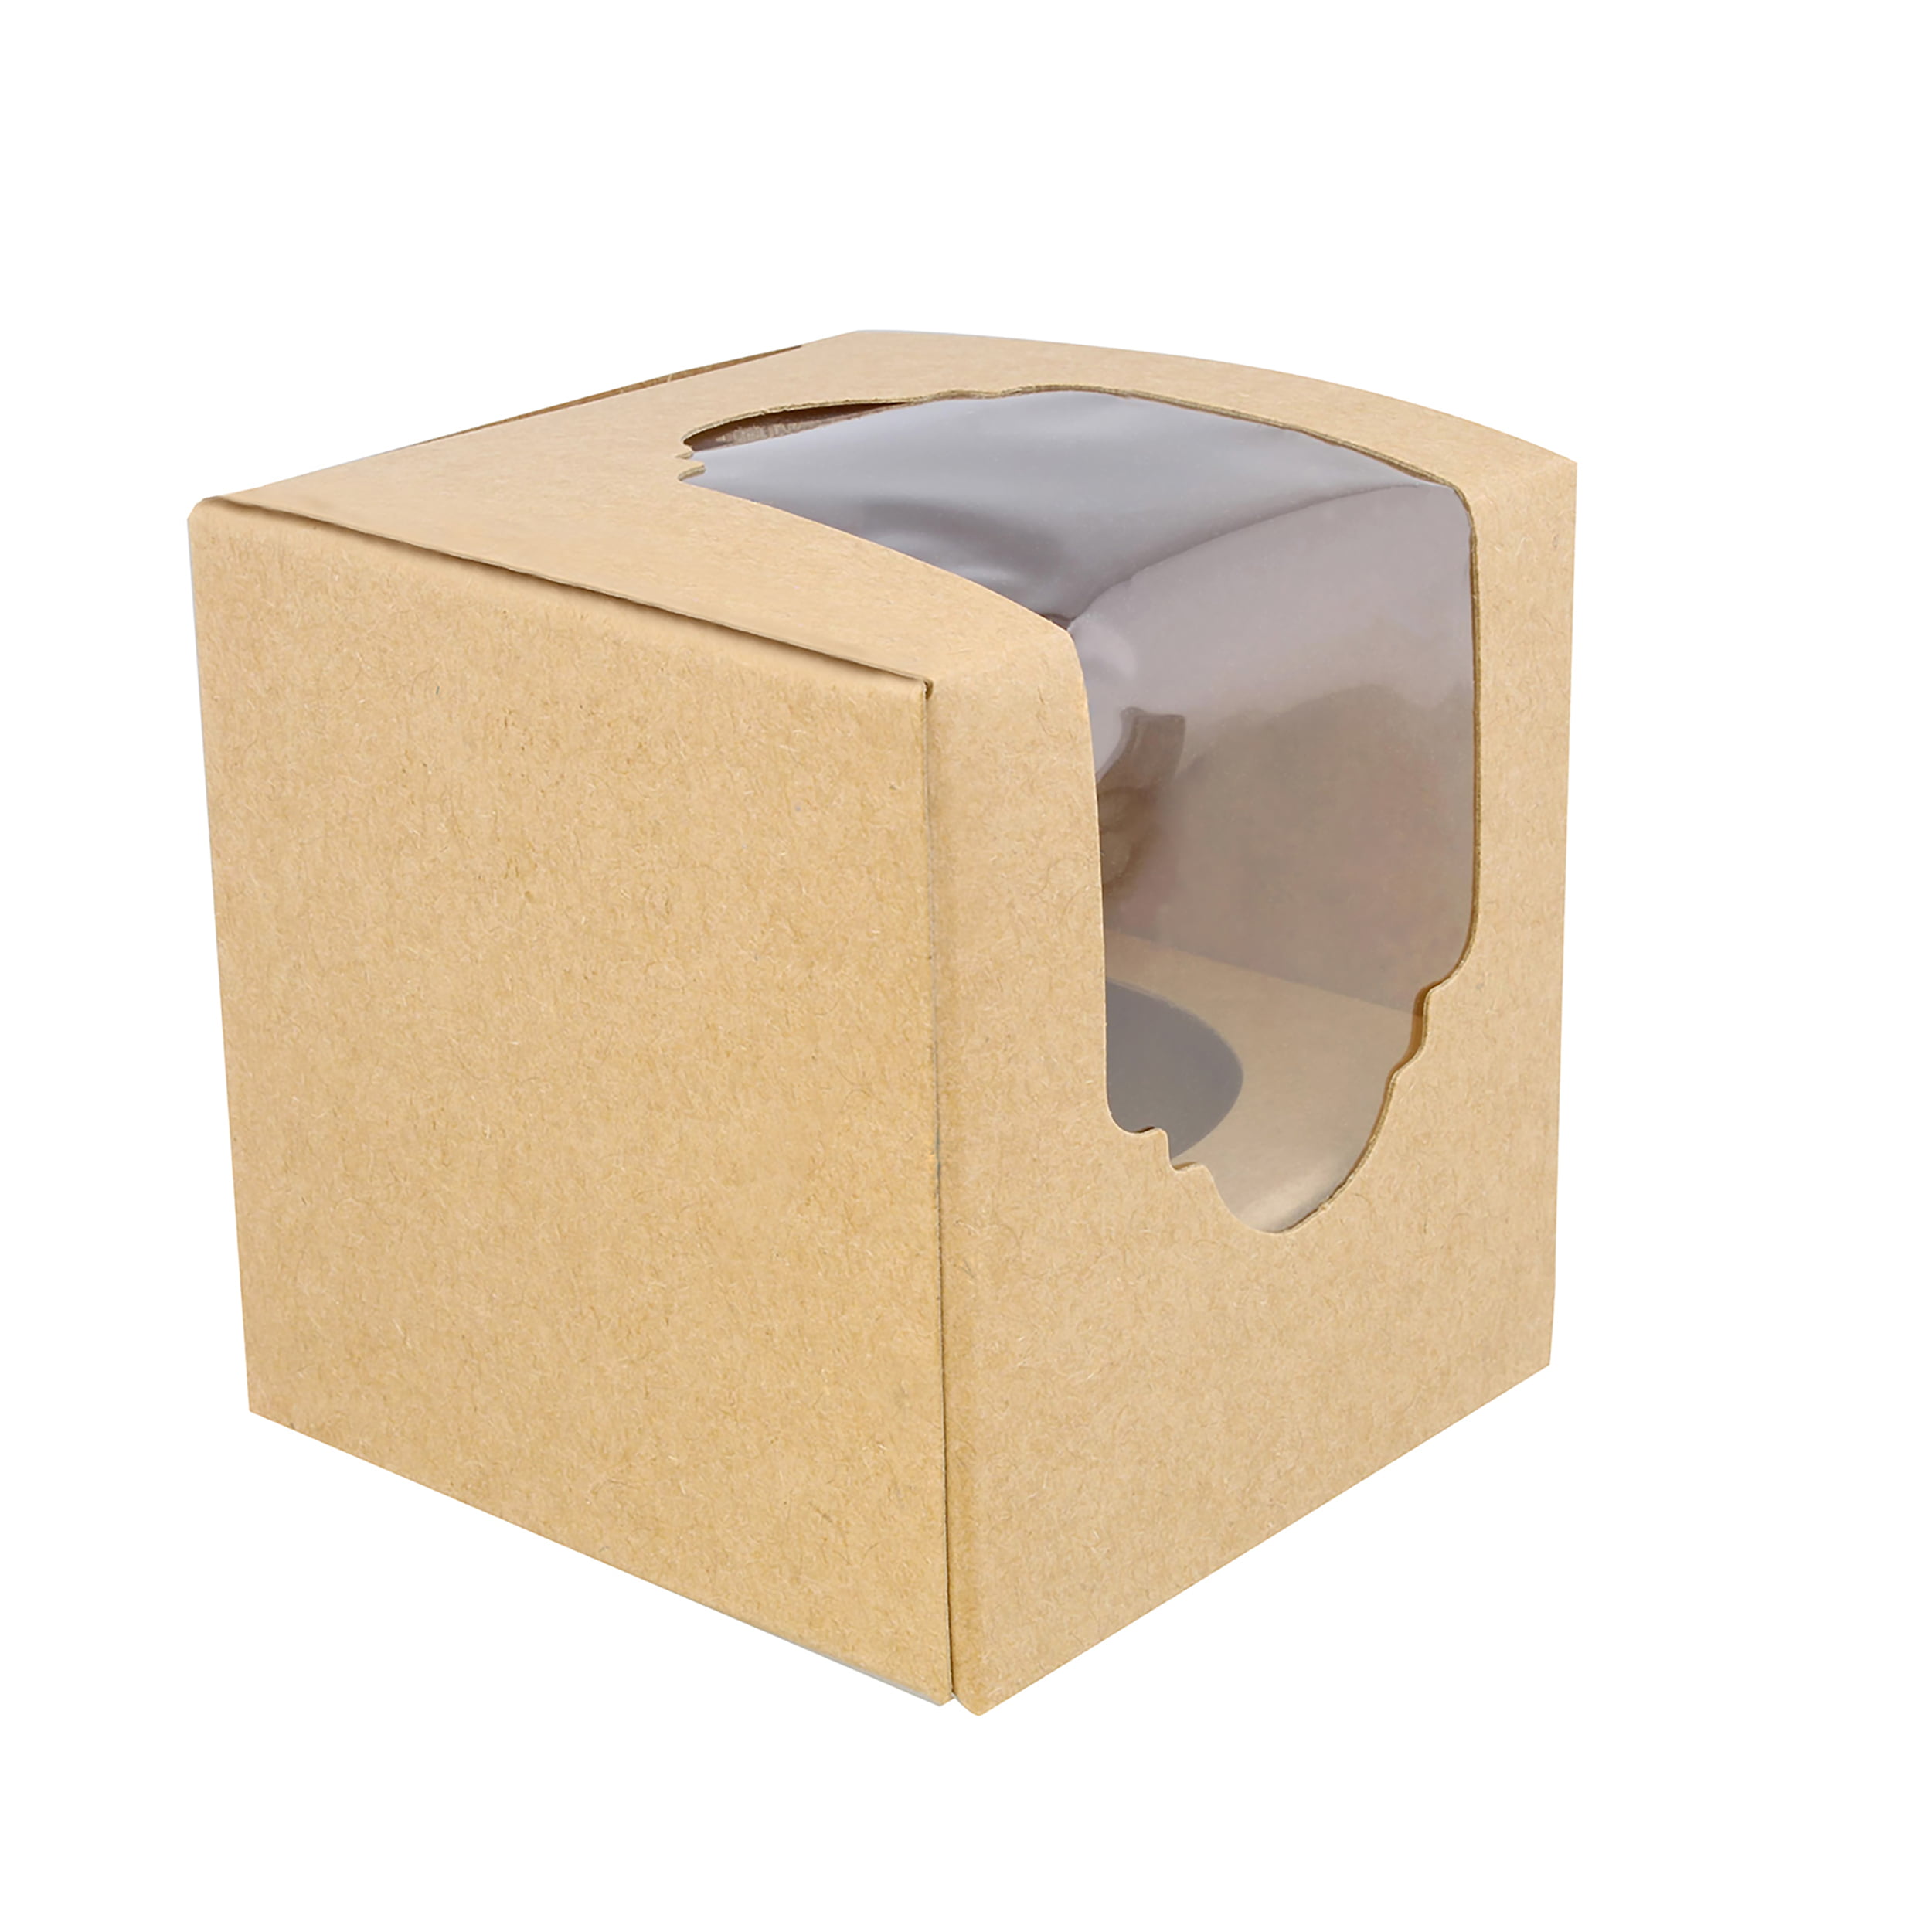 50 Pk Individual Cupcake Boxes with Inserts Brown SpecialT Single Cupcake Holders Large Cupcake To Go Container 